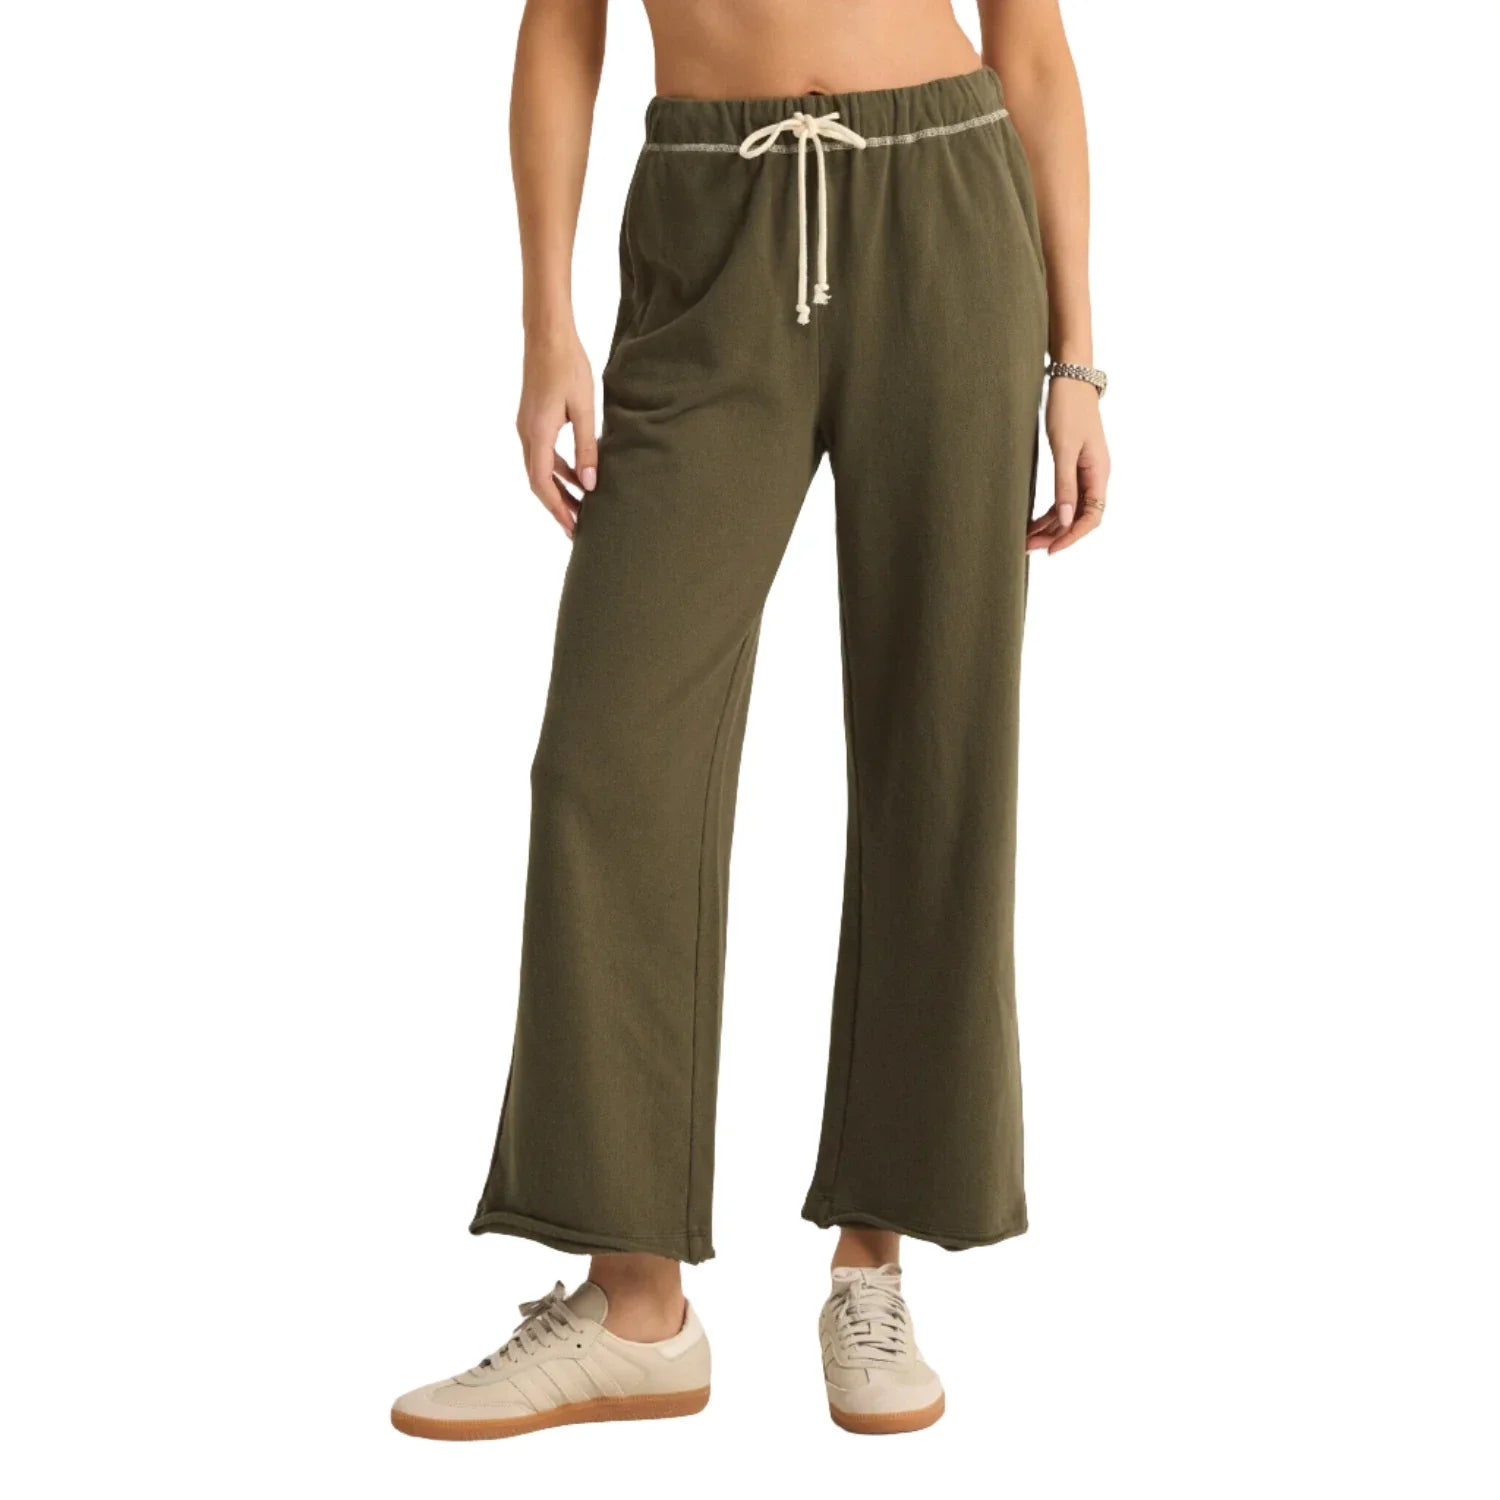 Z Supply 02. WOMENS APPAREL - WOMENS PANTS - WOMENS PANTS CASUAL Women's Huntington French Terry Pant GPL GRAPE LEAF